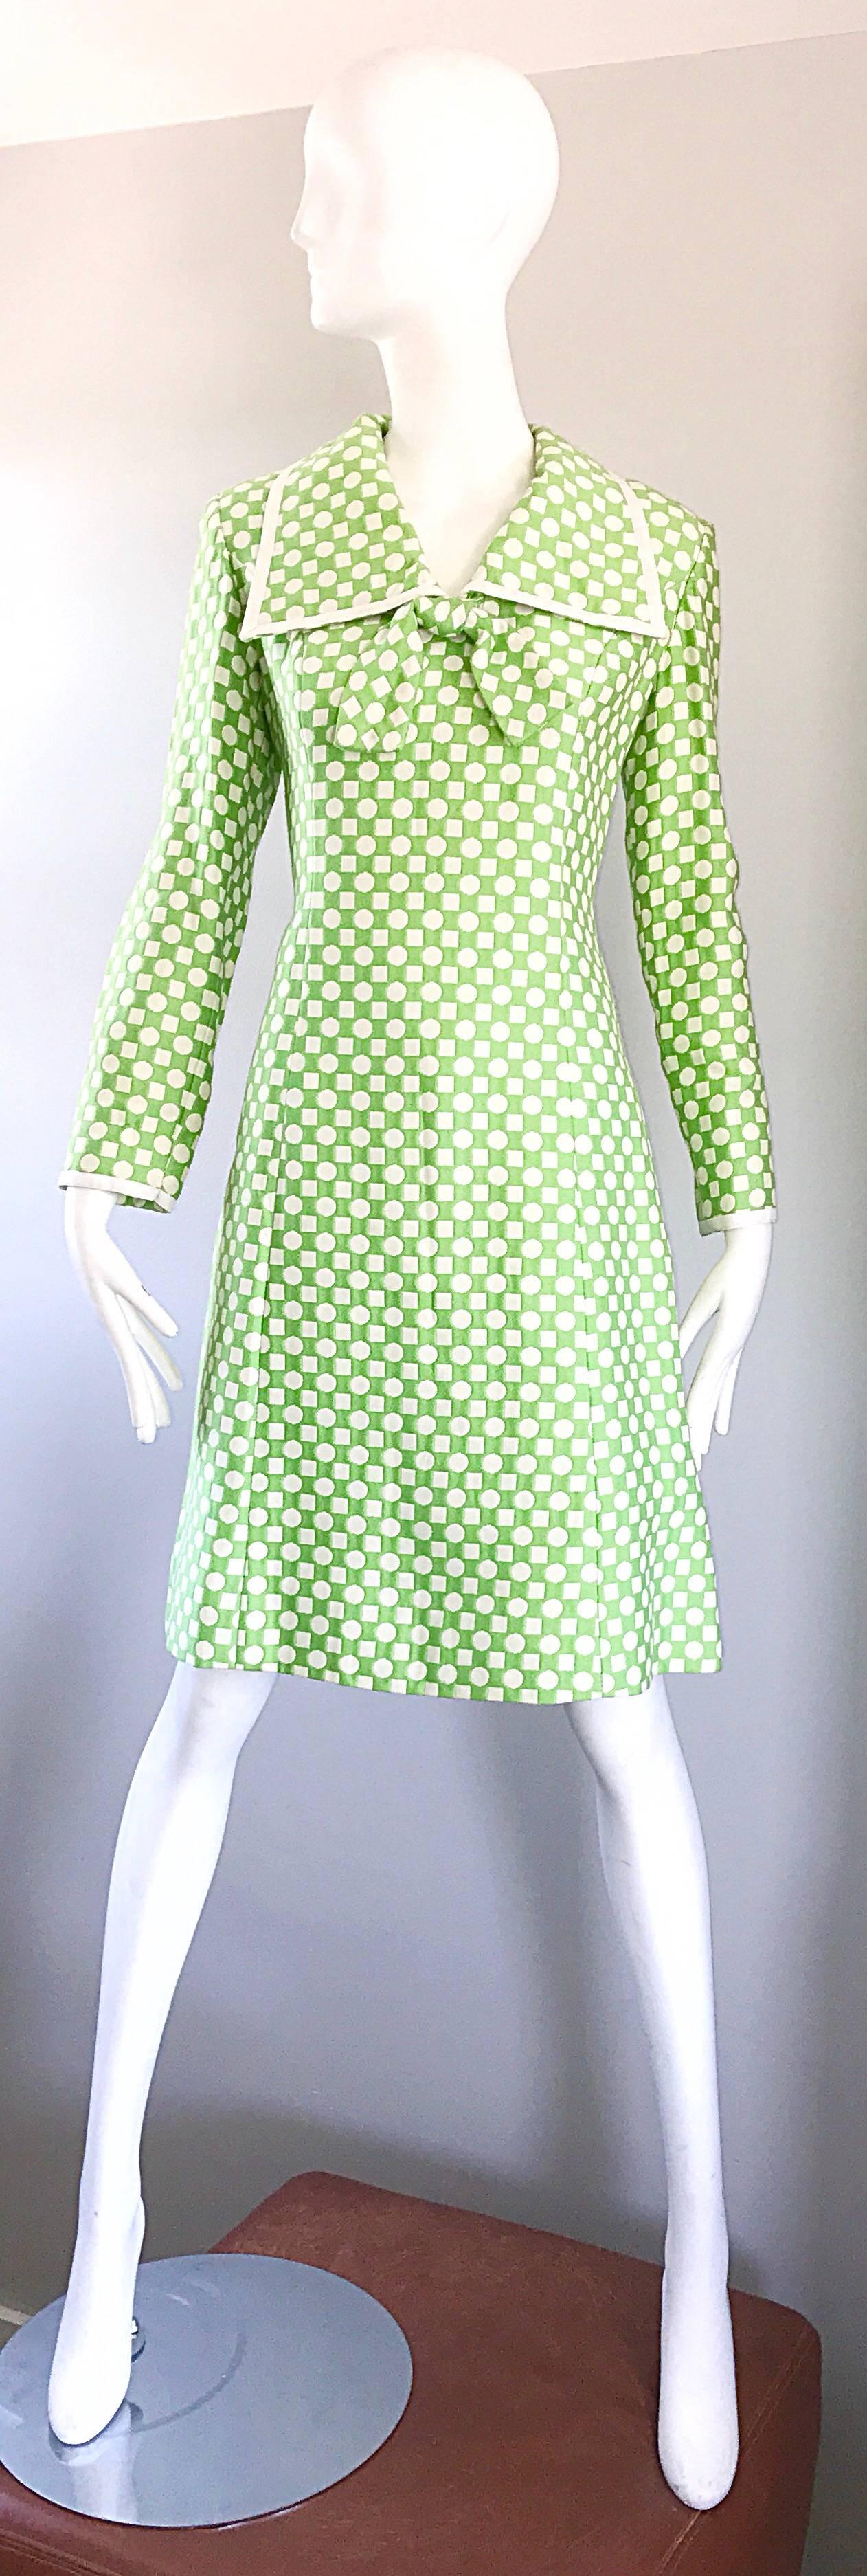 Chic mod 1960s GEOFFREY BEENE vintage green and white polka dot and square print long sleeve A-Line dress! Features a soft cotton knit, with sorbet color squares and white circles printed throughout. Nautical sailor collar with a pre-tied bow in the